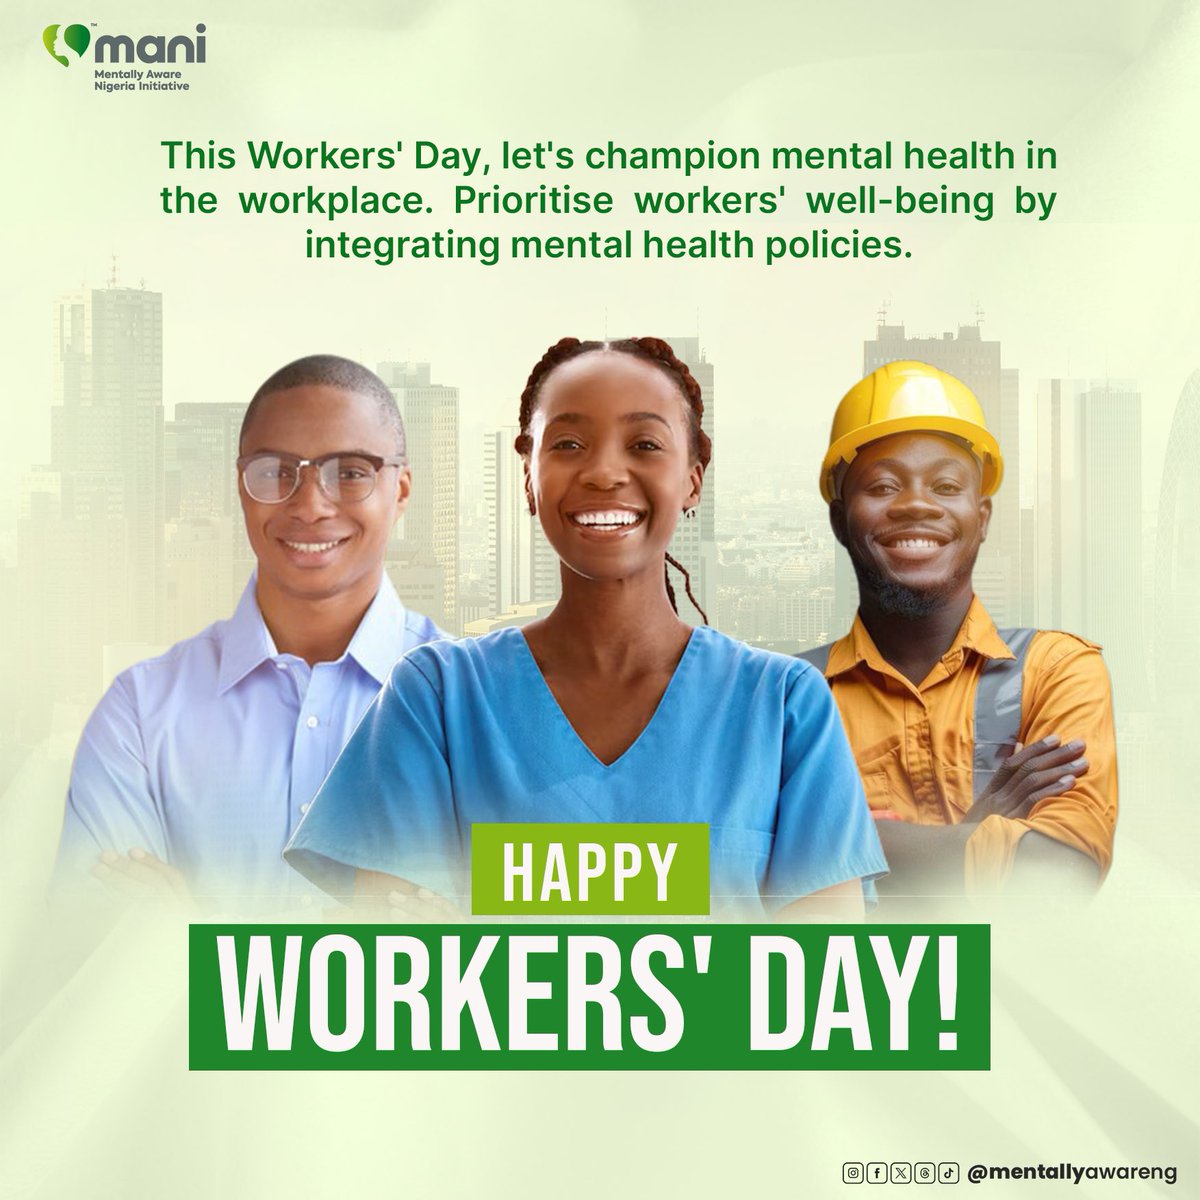 Today, as we honour the hard work and dedication of workers worldwide, let's also shine a light on mental health in the workplace. From office environments to remote settings, mental well-being plays a crucial role in employee productivity and satisfaction. Let's prioritise